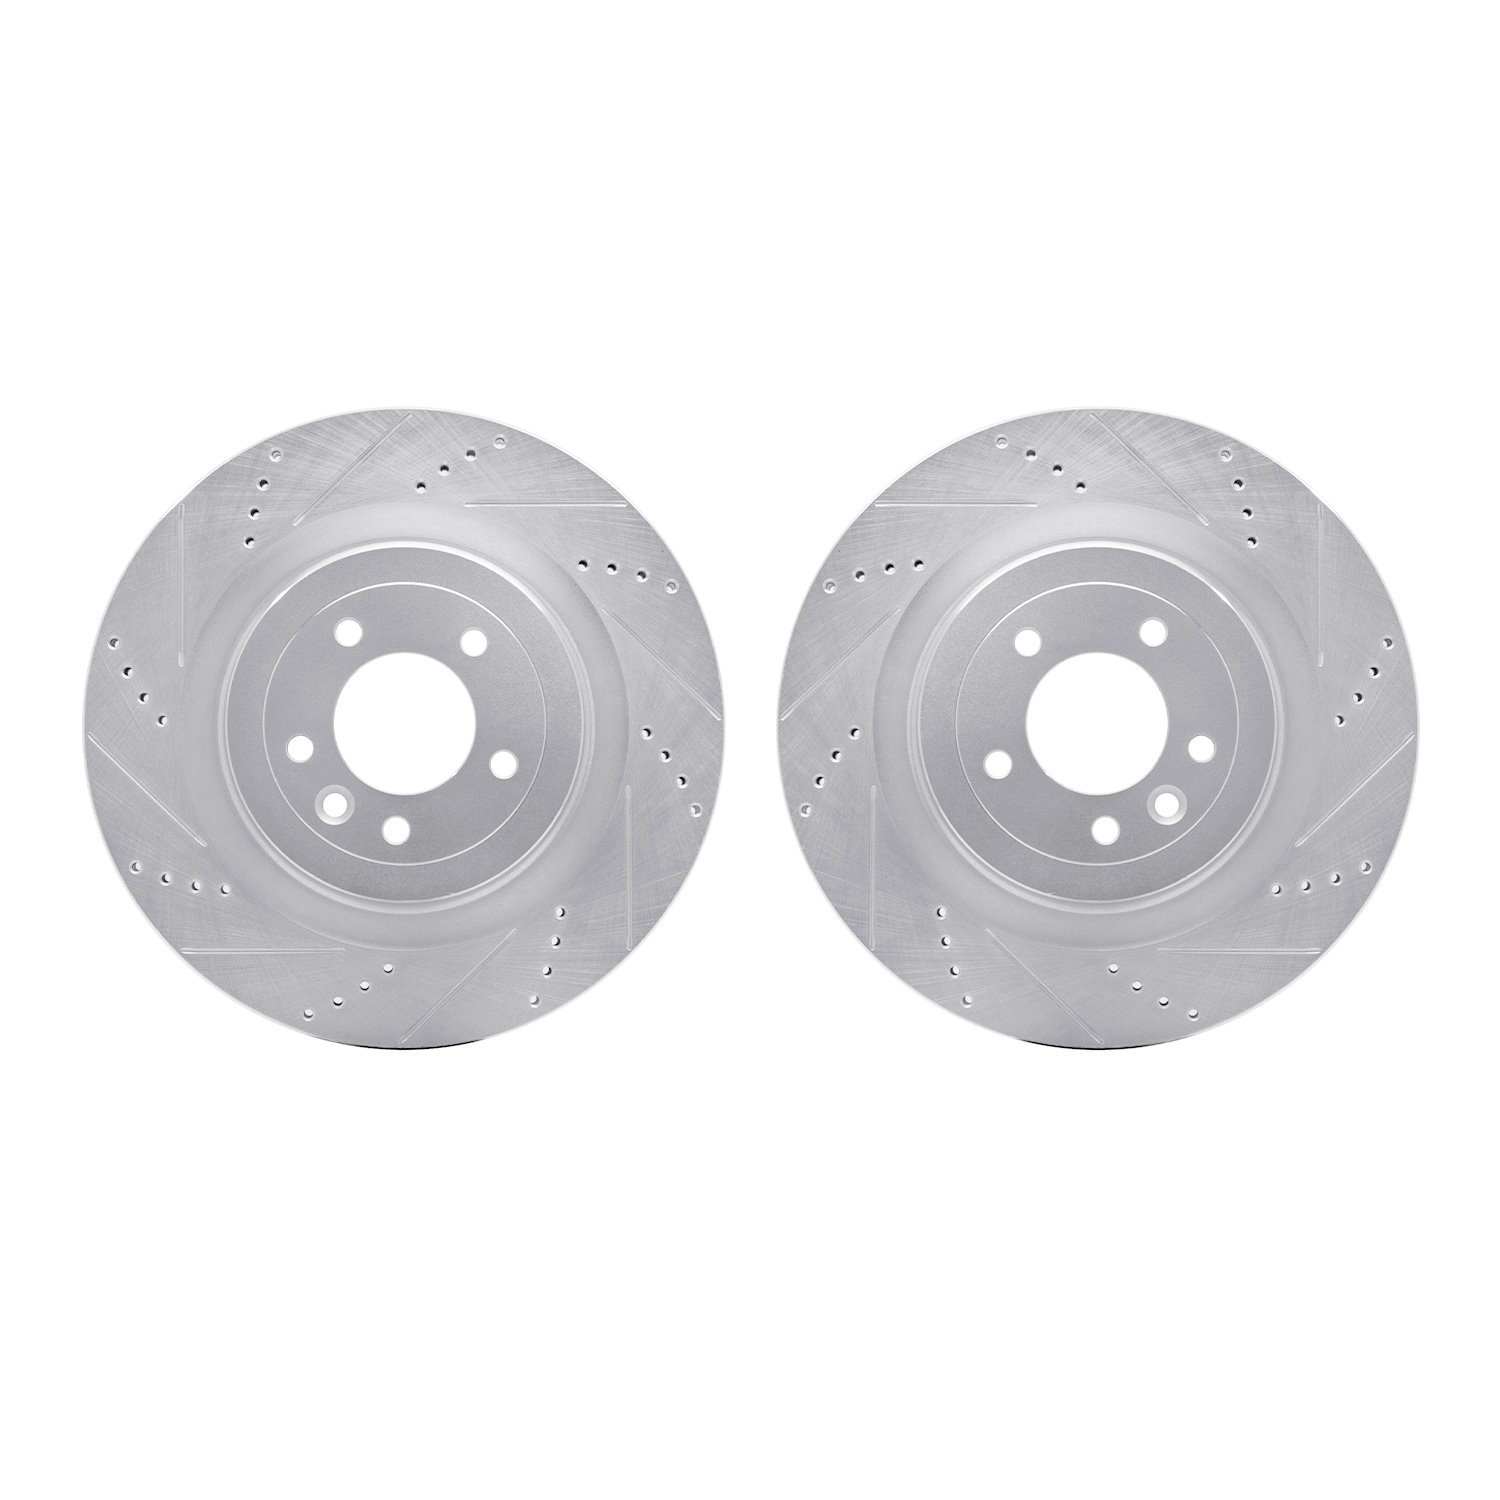 Drilled/Slotted Brake Rotors [Silver], Fits Select Land Rover